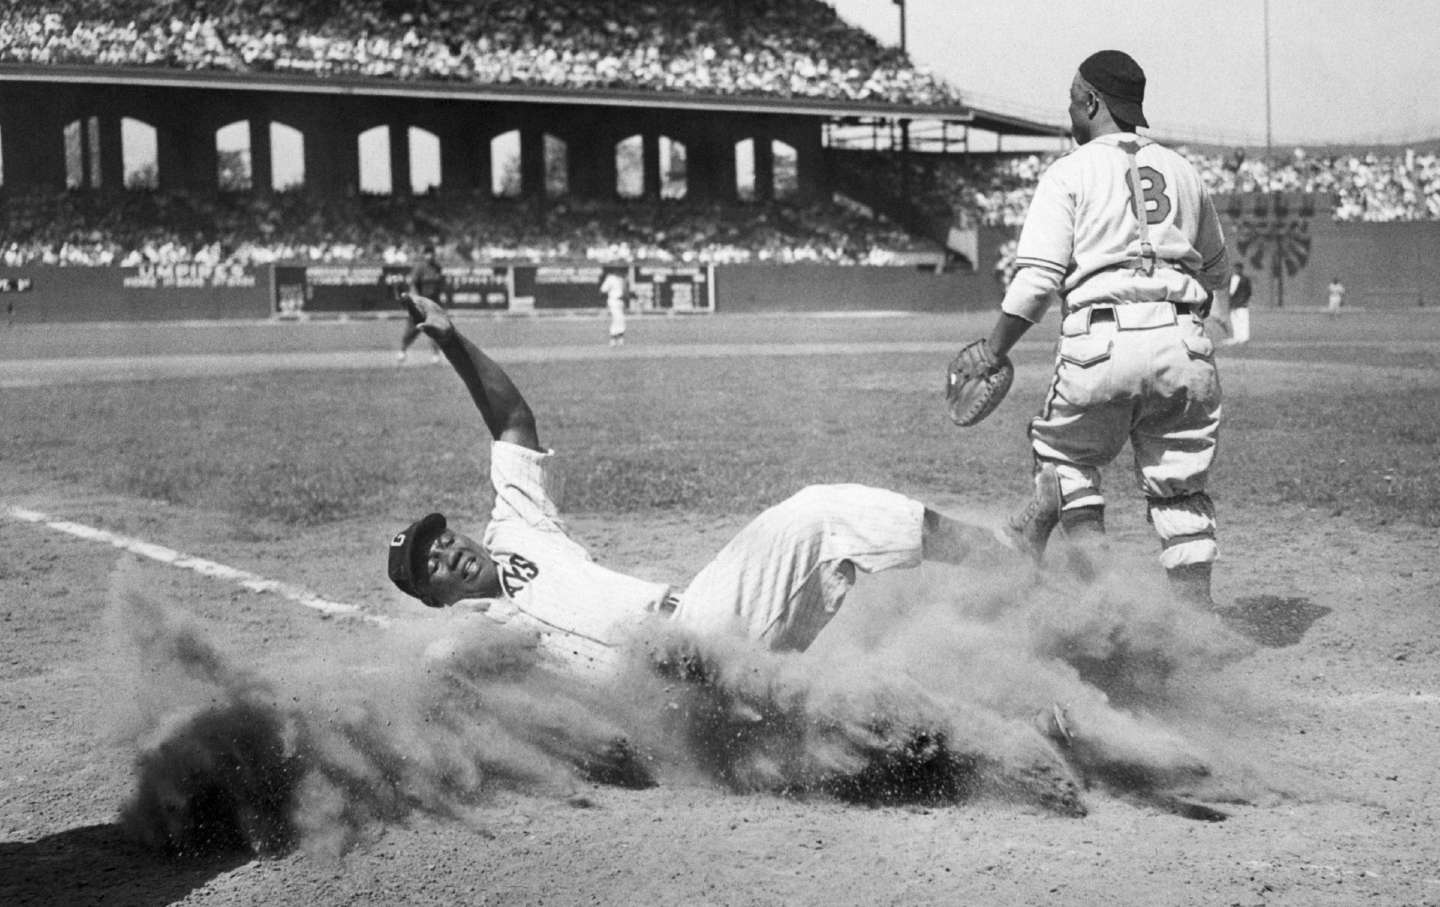 Josh Gibson slides into home plate